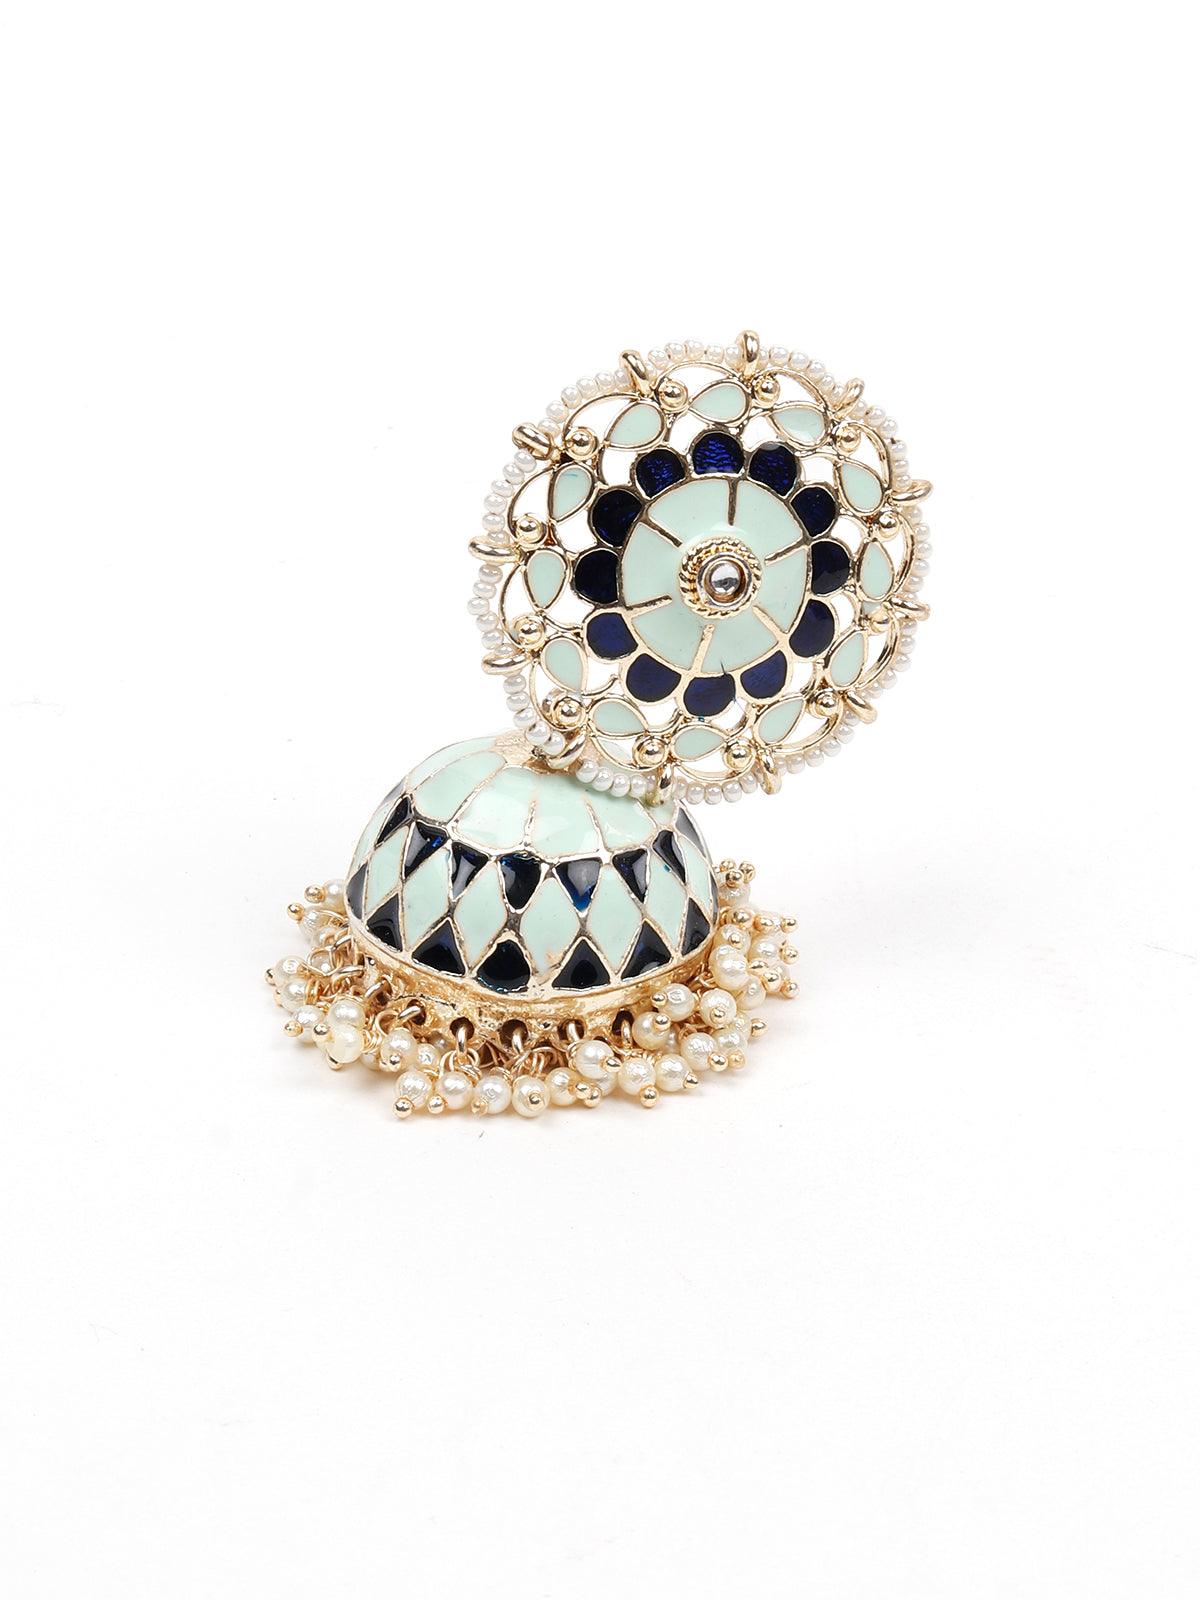 Stunning sea green and navy blue jhumkas - Odette